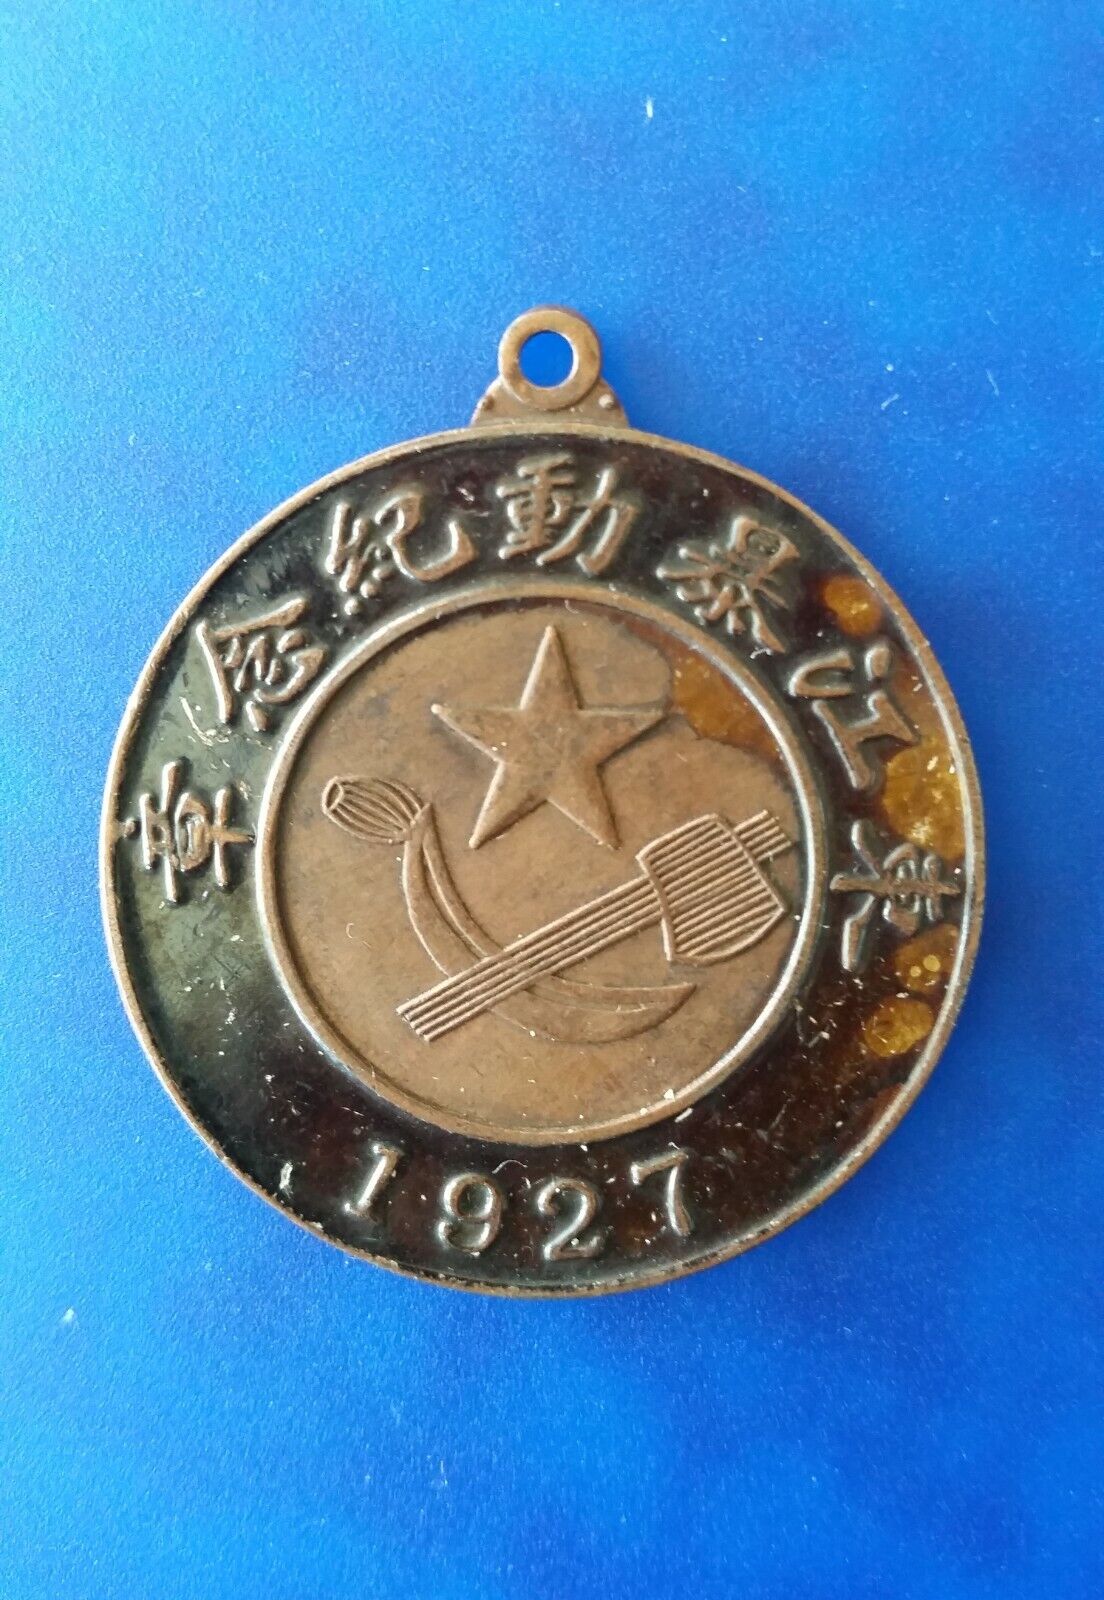 A rare Chinese commemorate badge